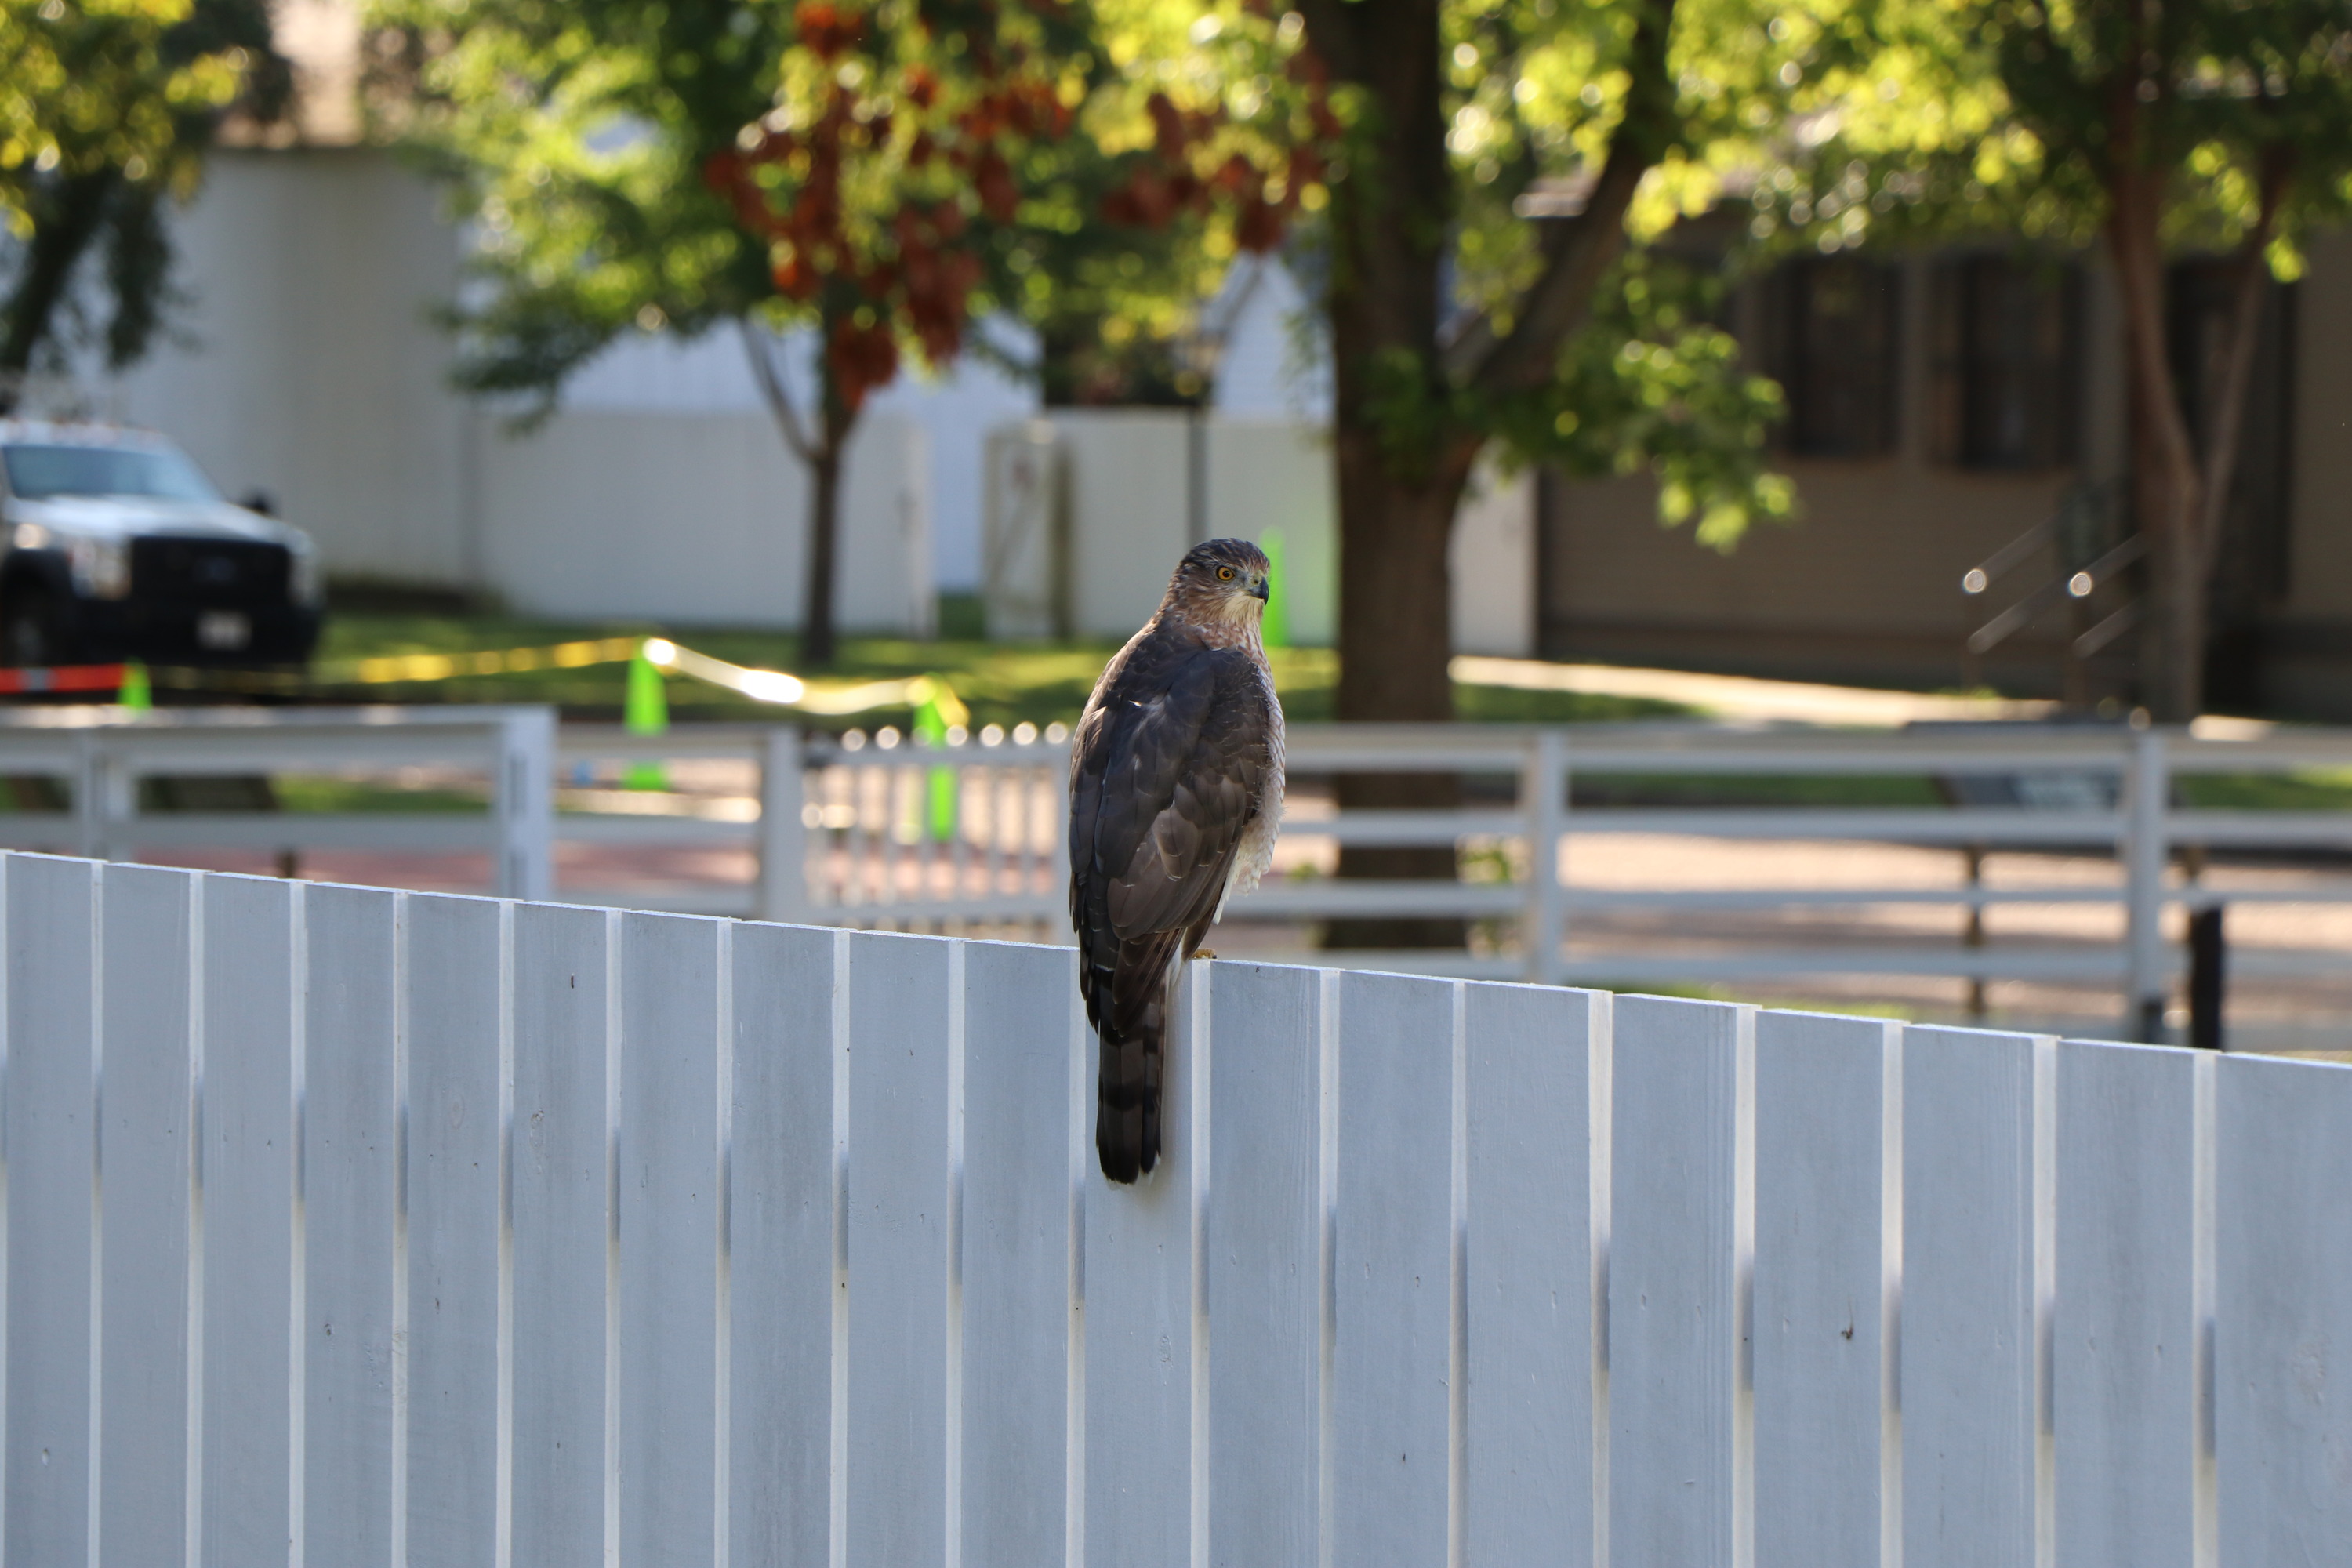 A large bird with a brown back and a white front perched on a white fence.